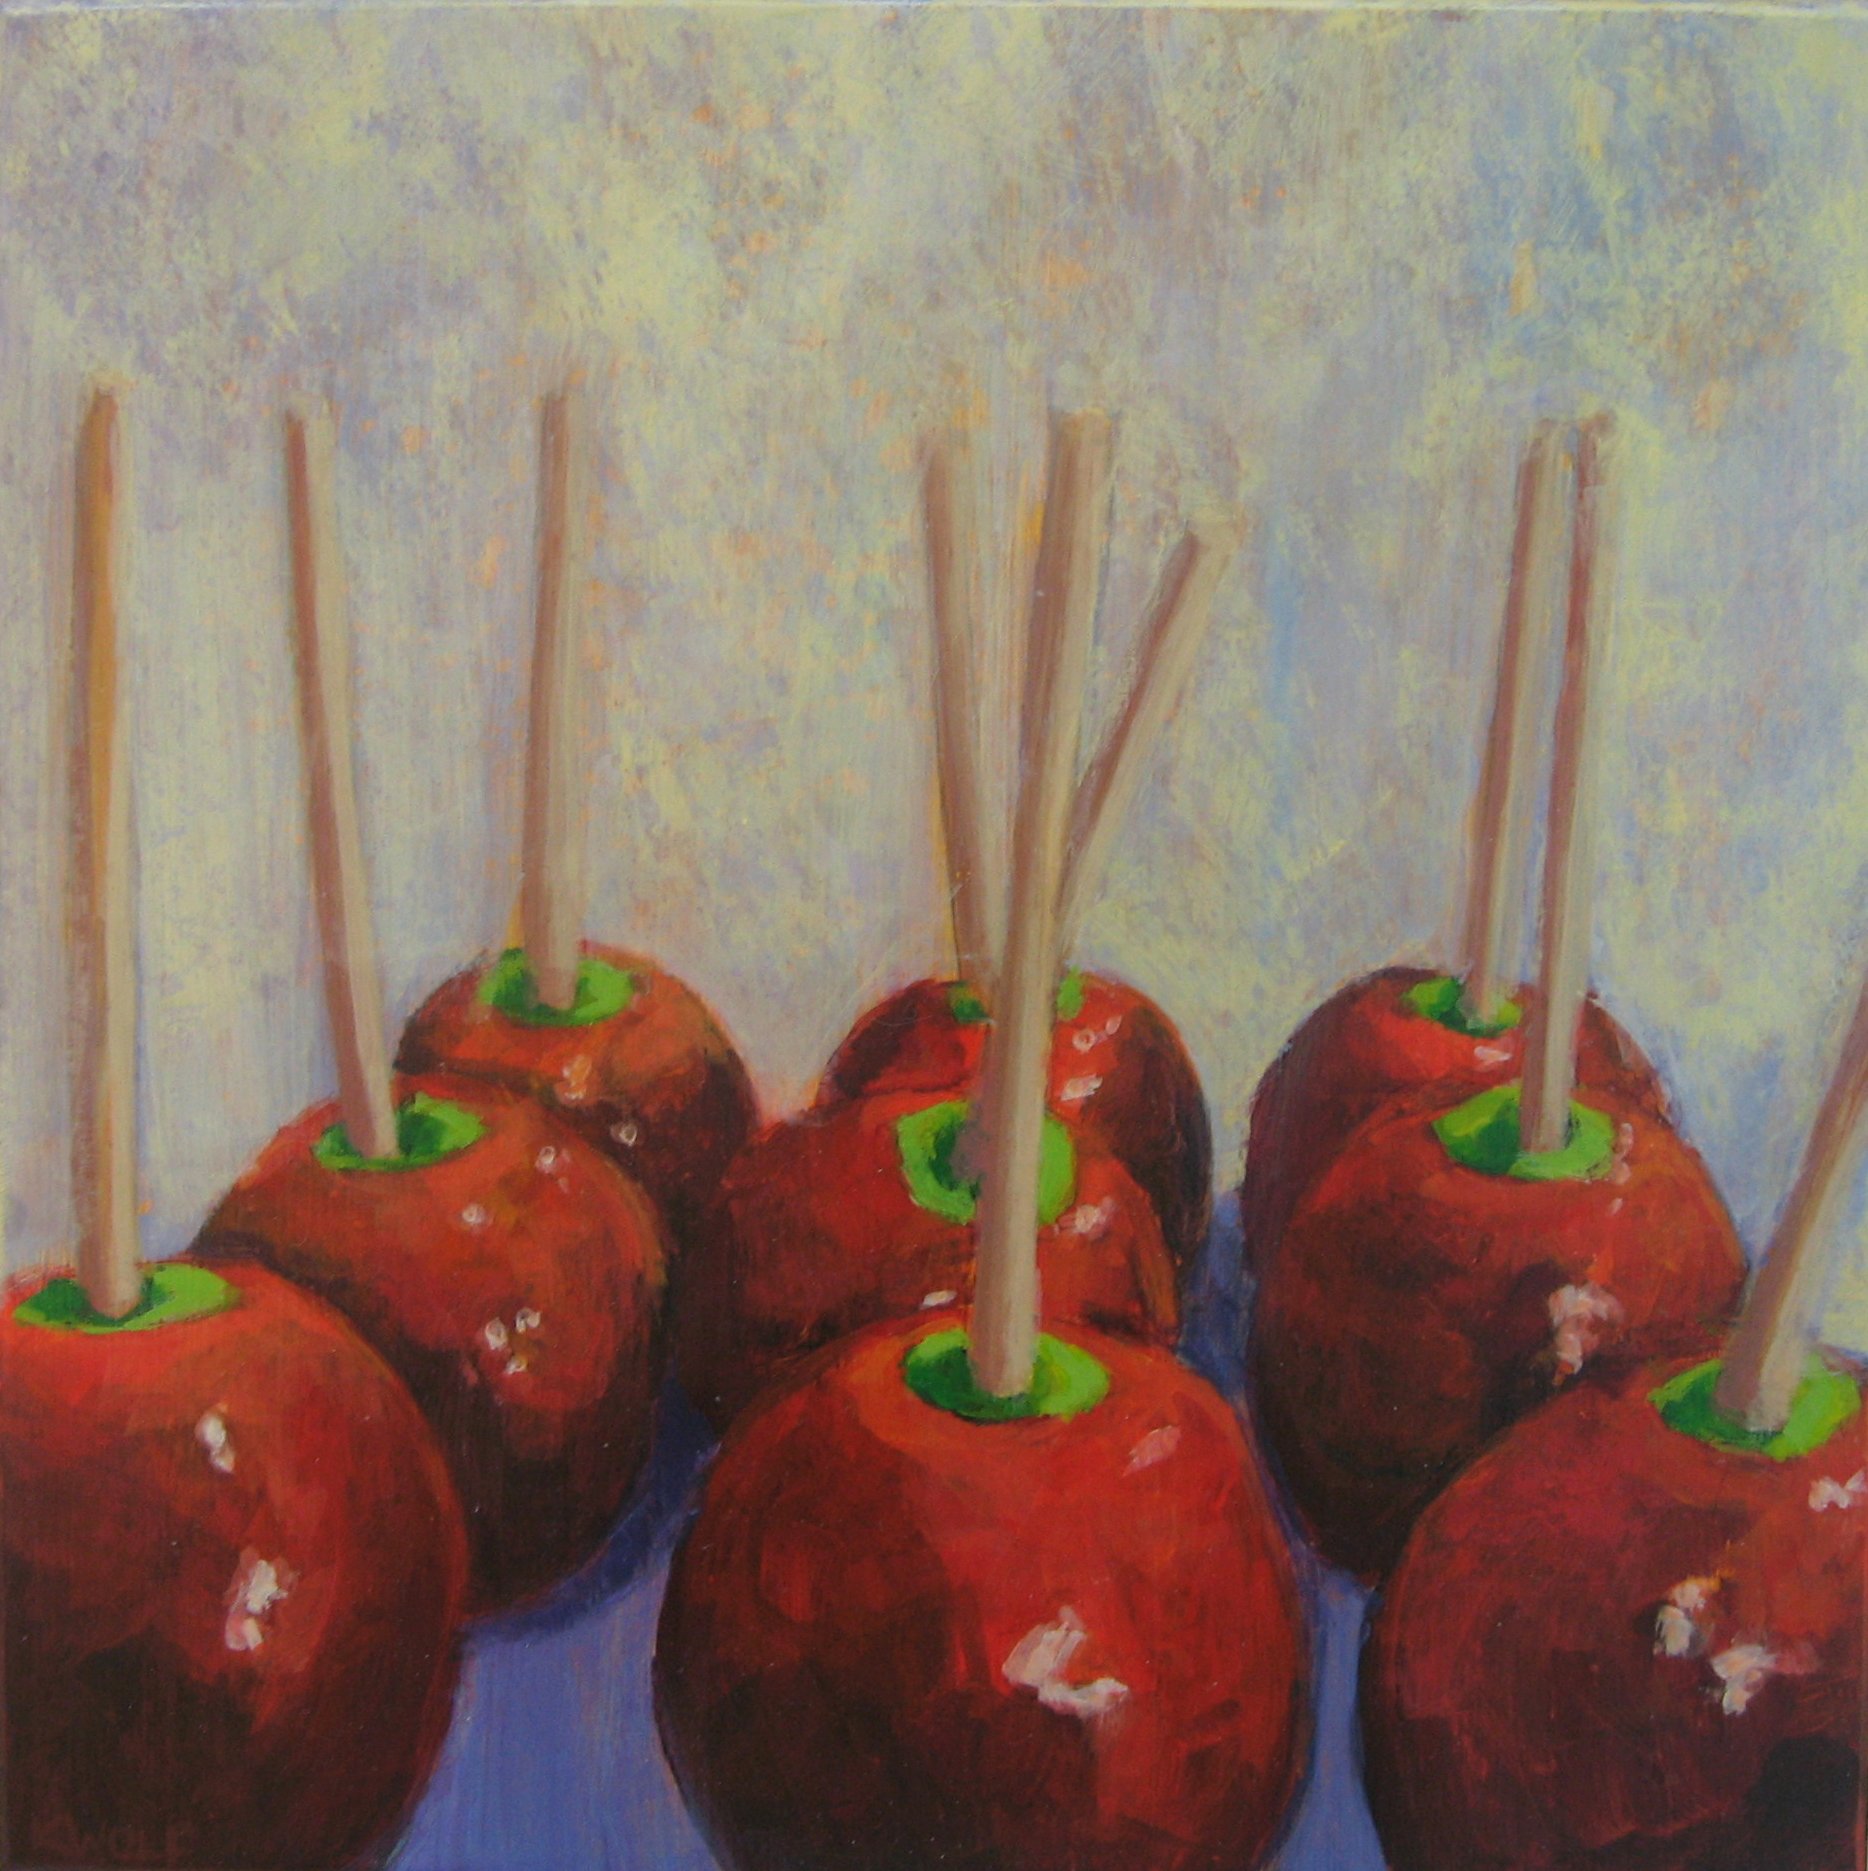 Candy Apples by Kathleen Wolf